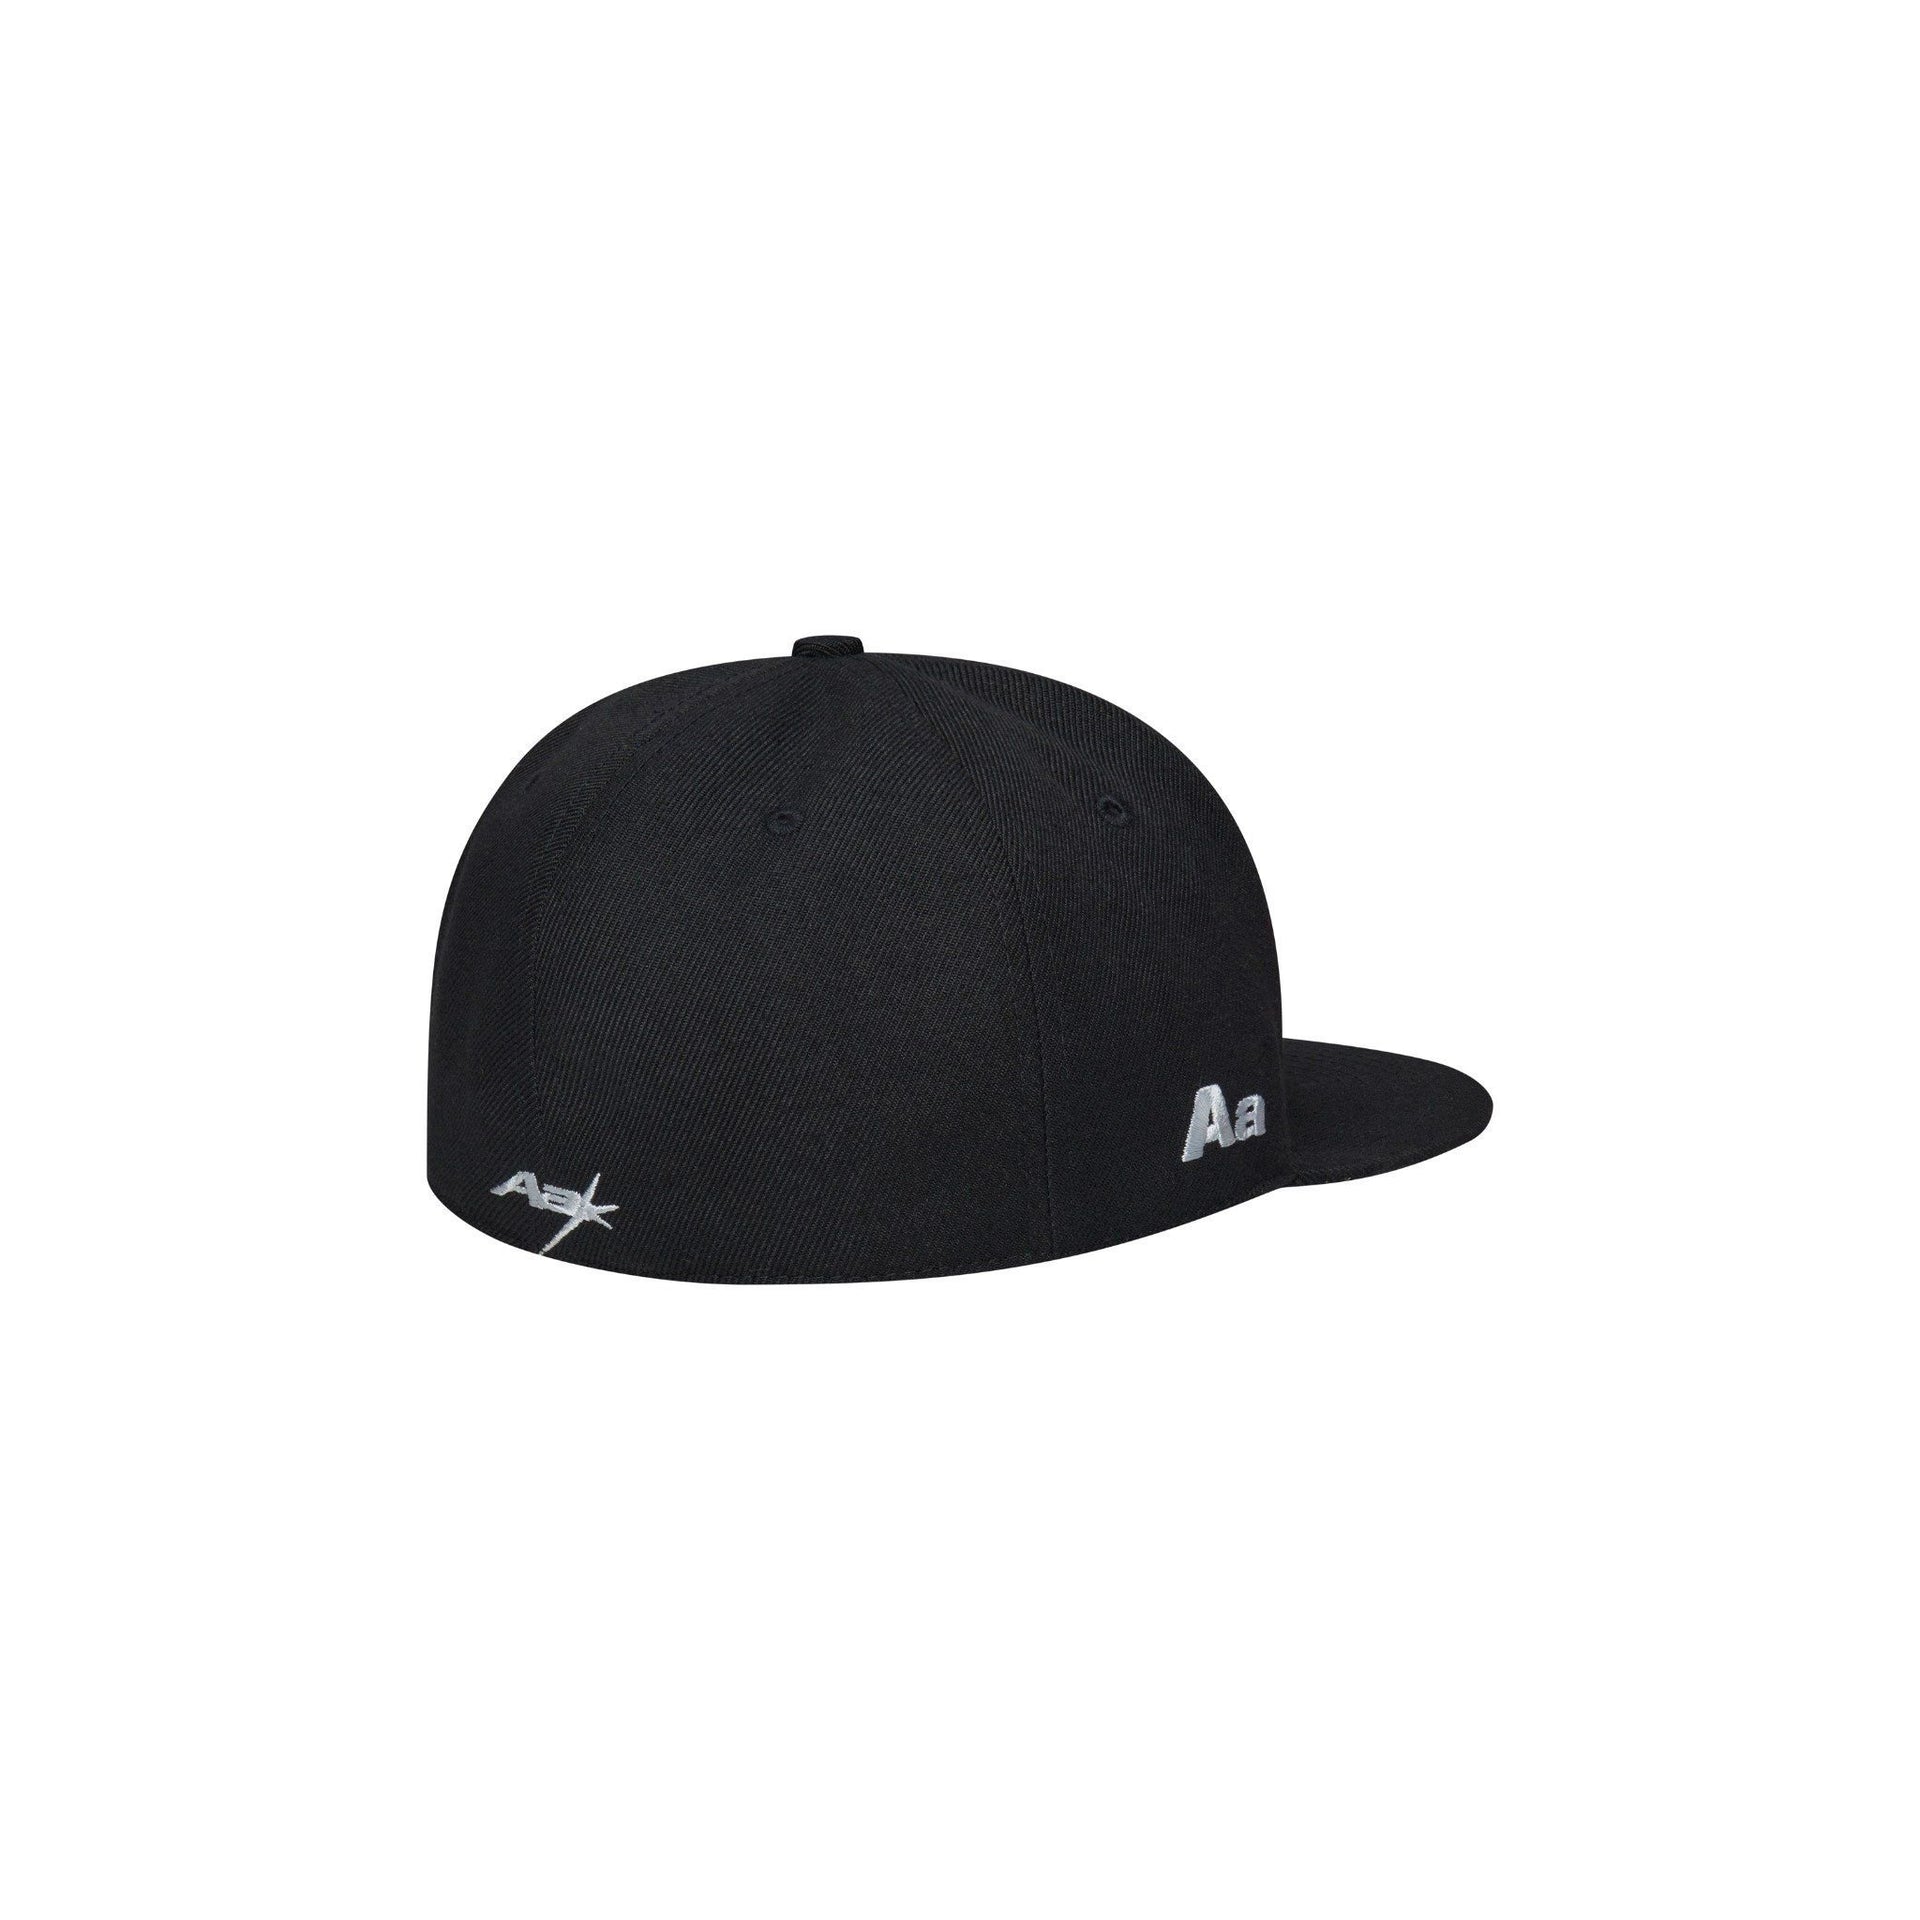 AA Racing Logo Fitted - Black